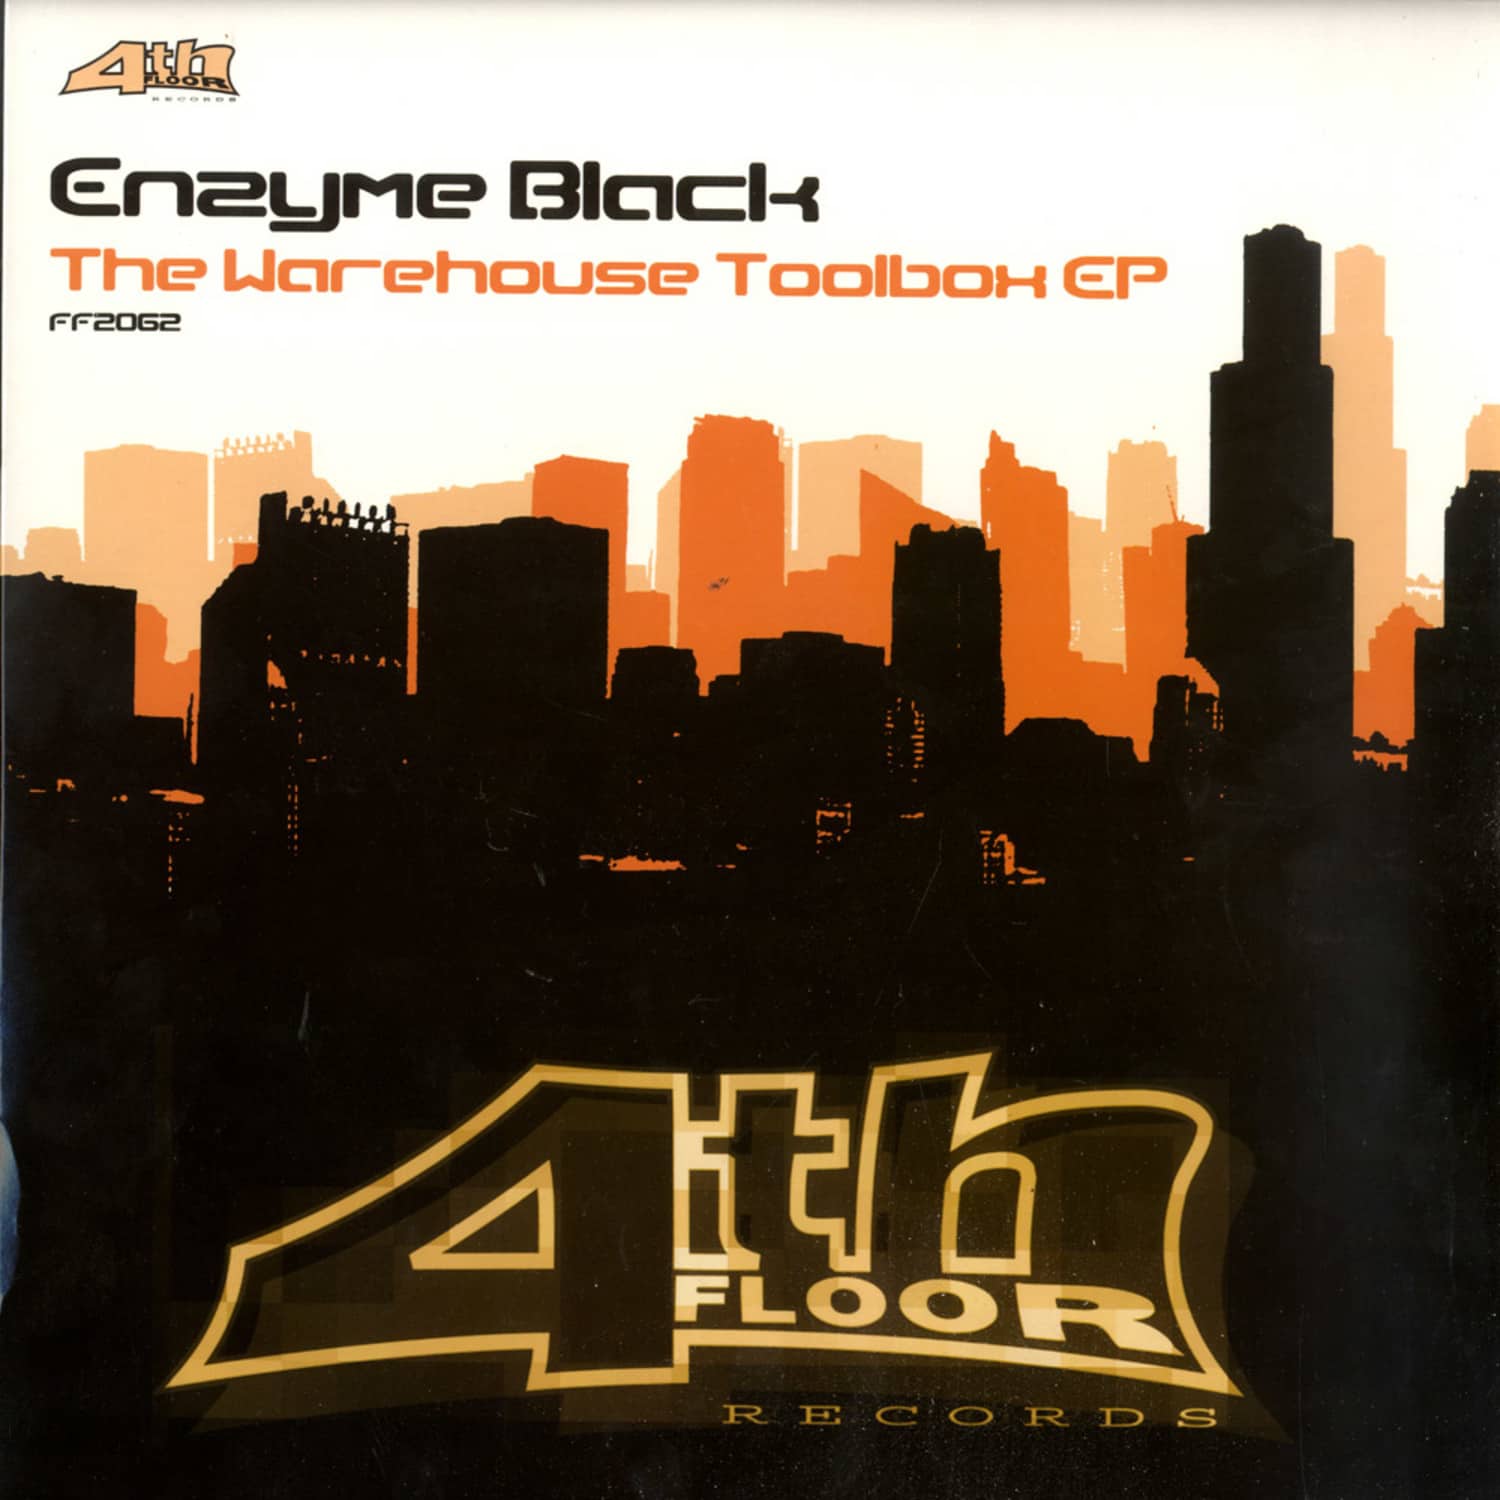 Enzyme Black - THE WAREHOUSE TOOLBOX EP